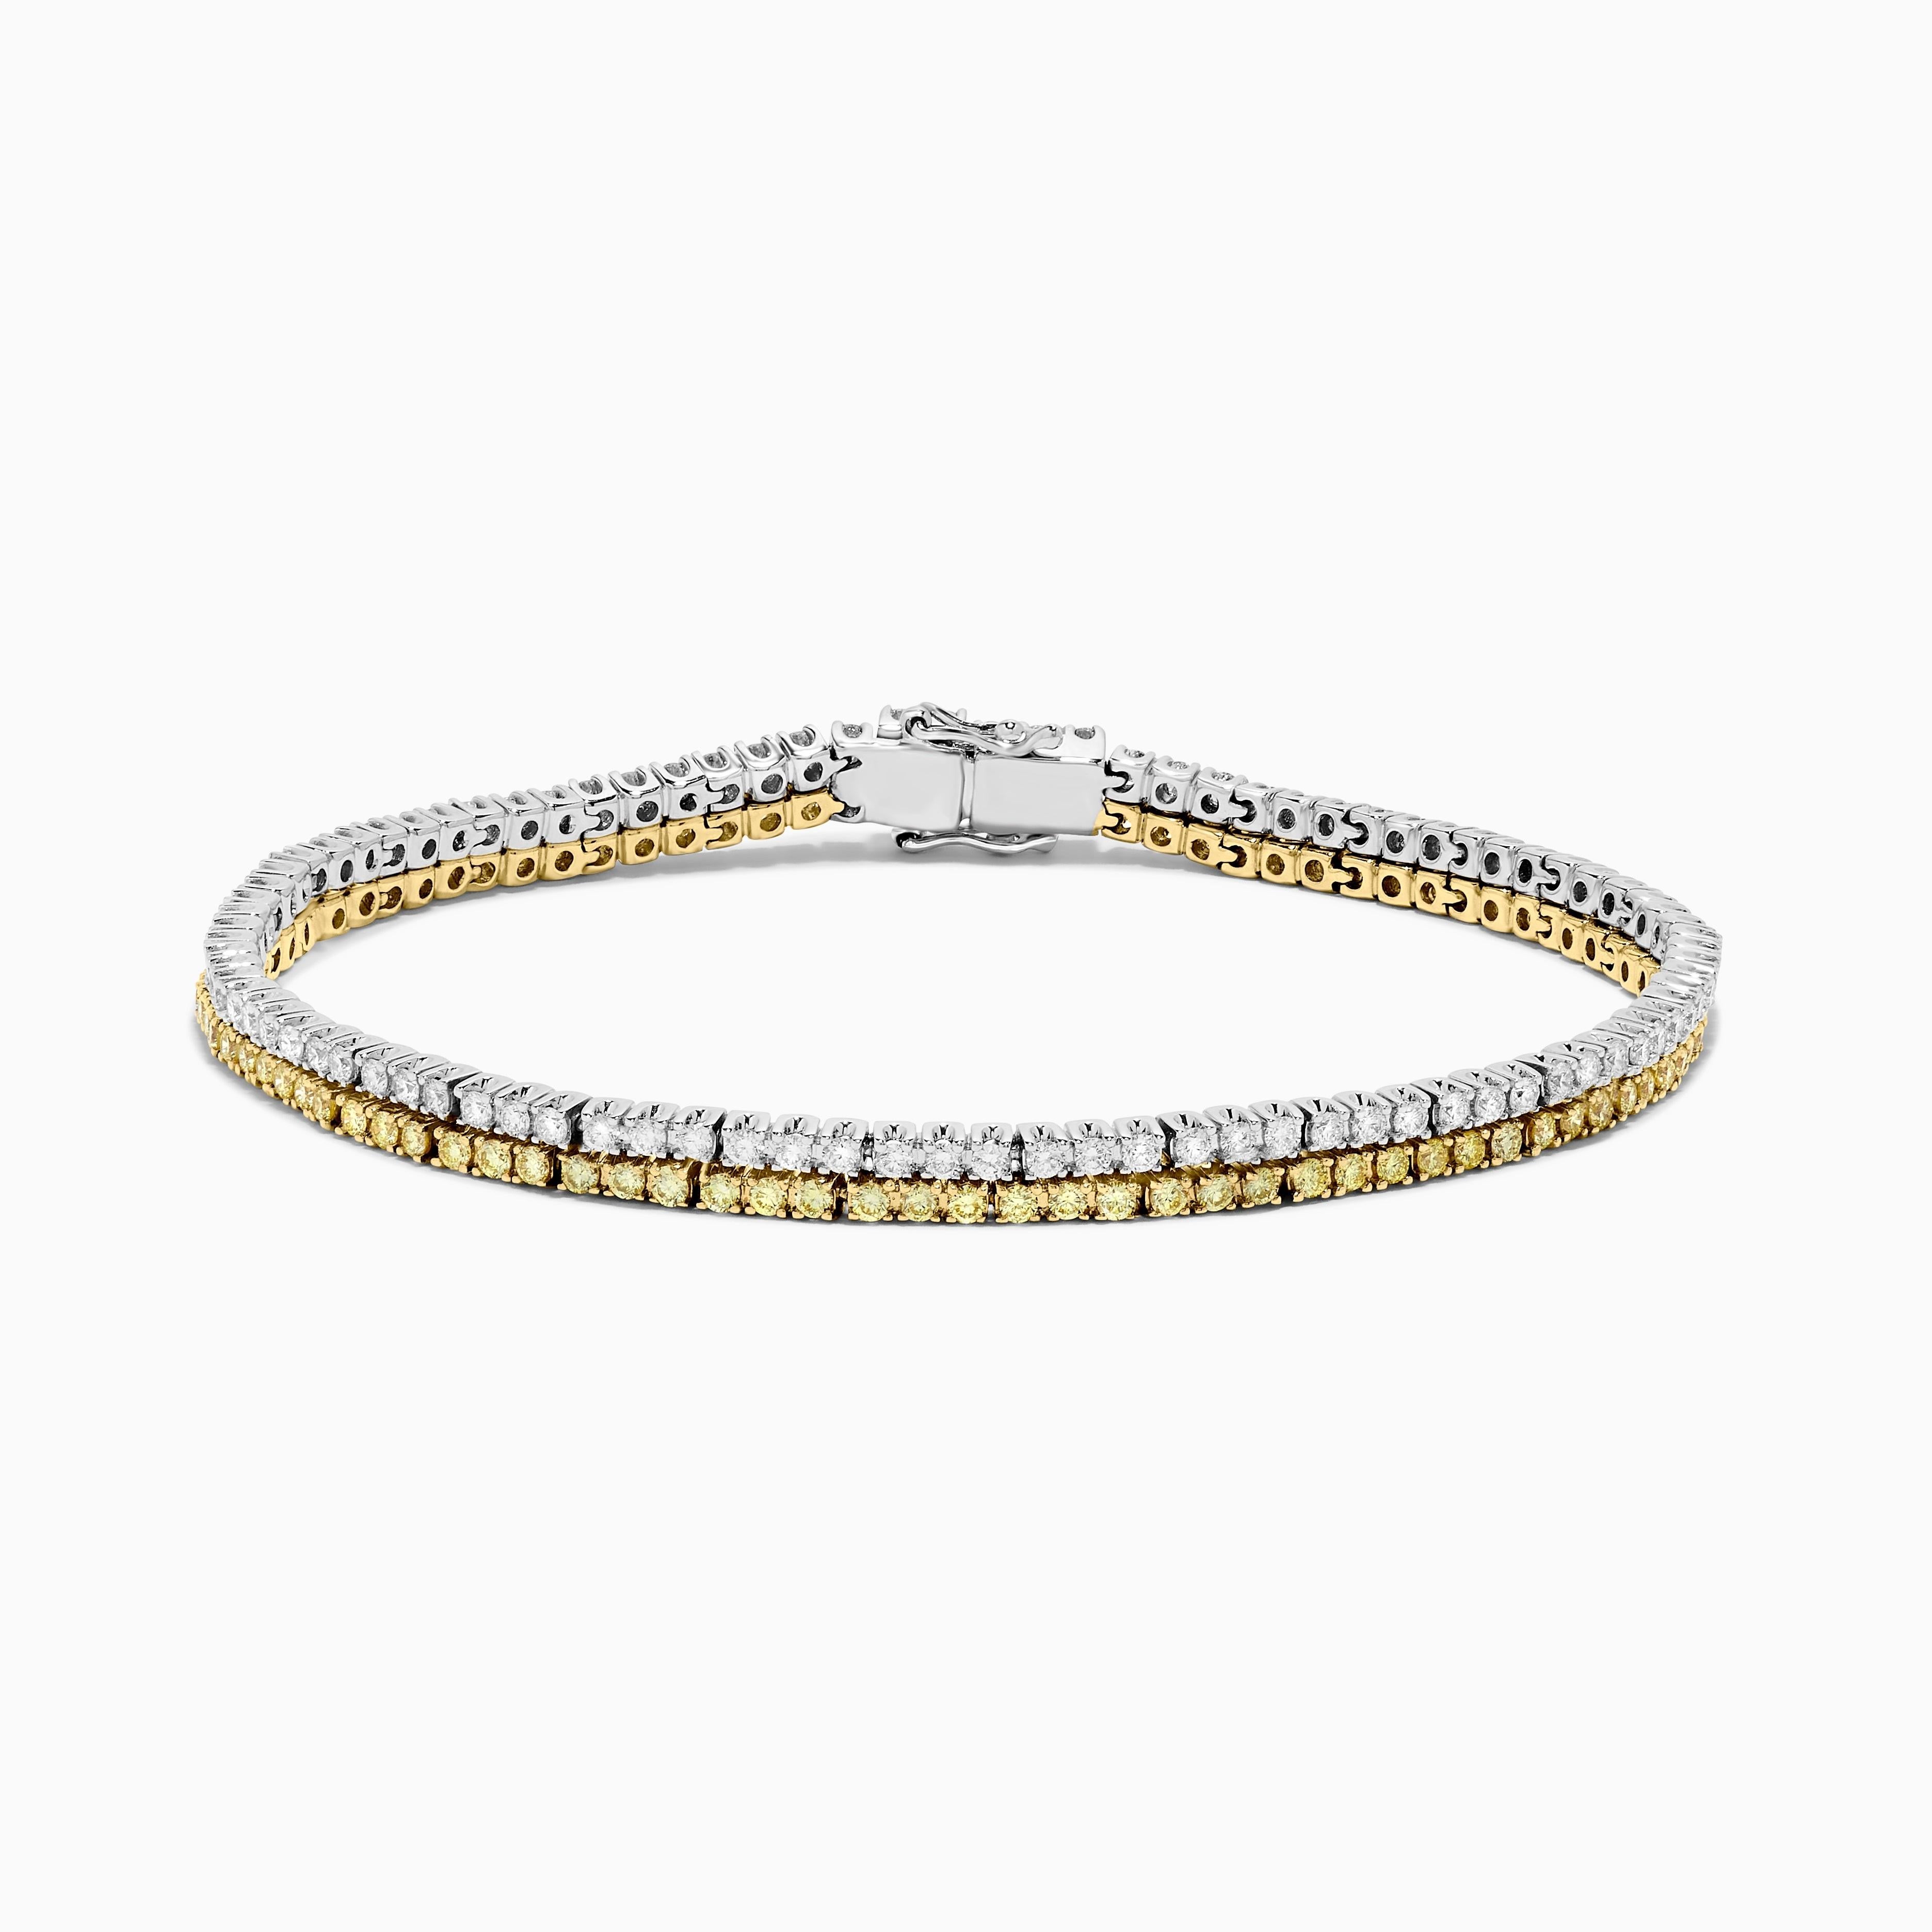 RareGemWorld's classic diamond bracelet. Mounted in a beautiful 18K Yellow and White Gold setting with natural round cut yellow diamond melee complimented by natural round cut white diamond melee. This bracelet is guaranteed to impress and will